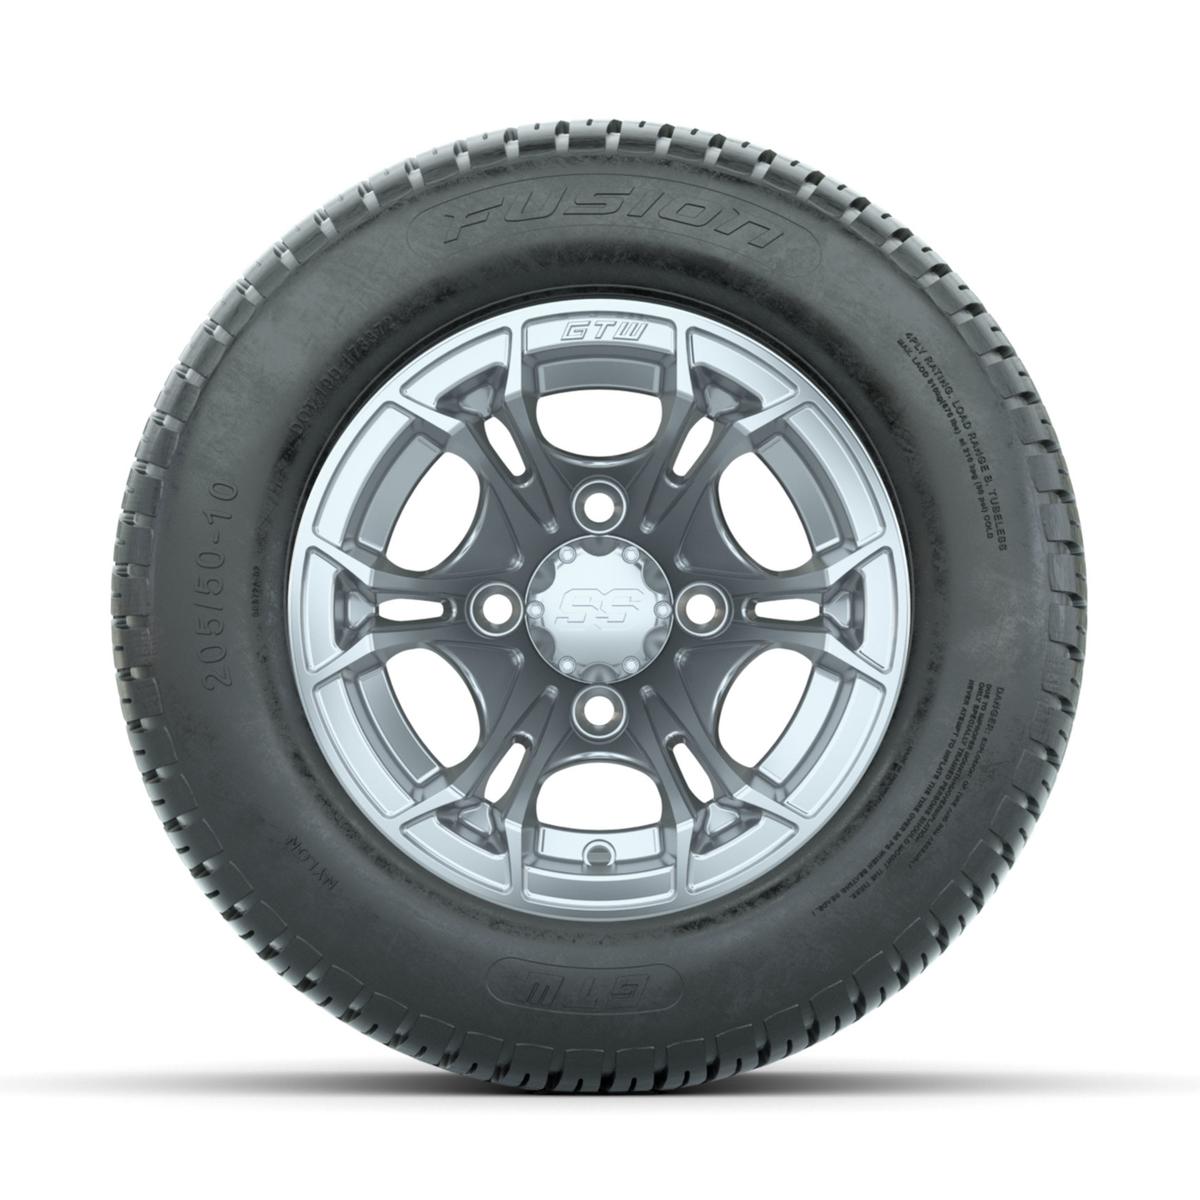 GTW Spyder Silver Brush 10 in Wheels with 205/50-10 Fusion Street Tires – Full Set